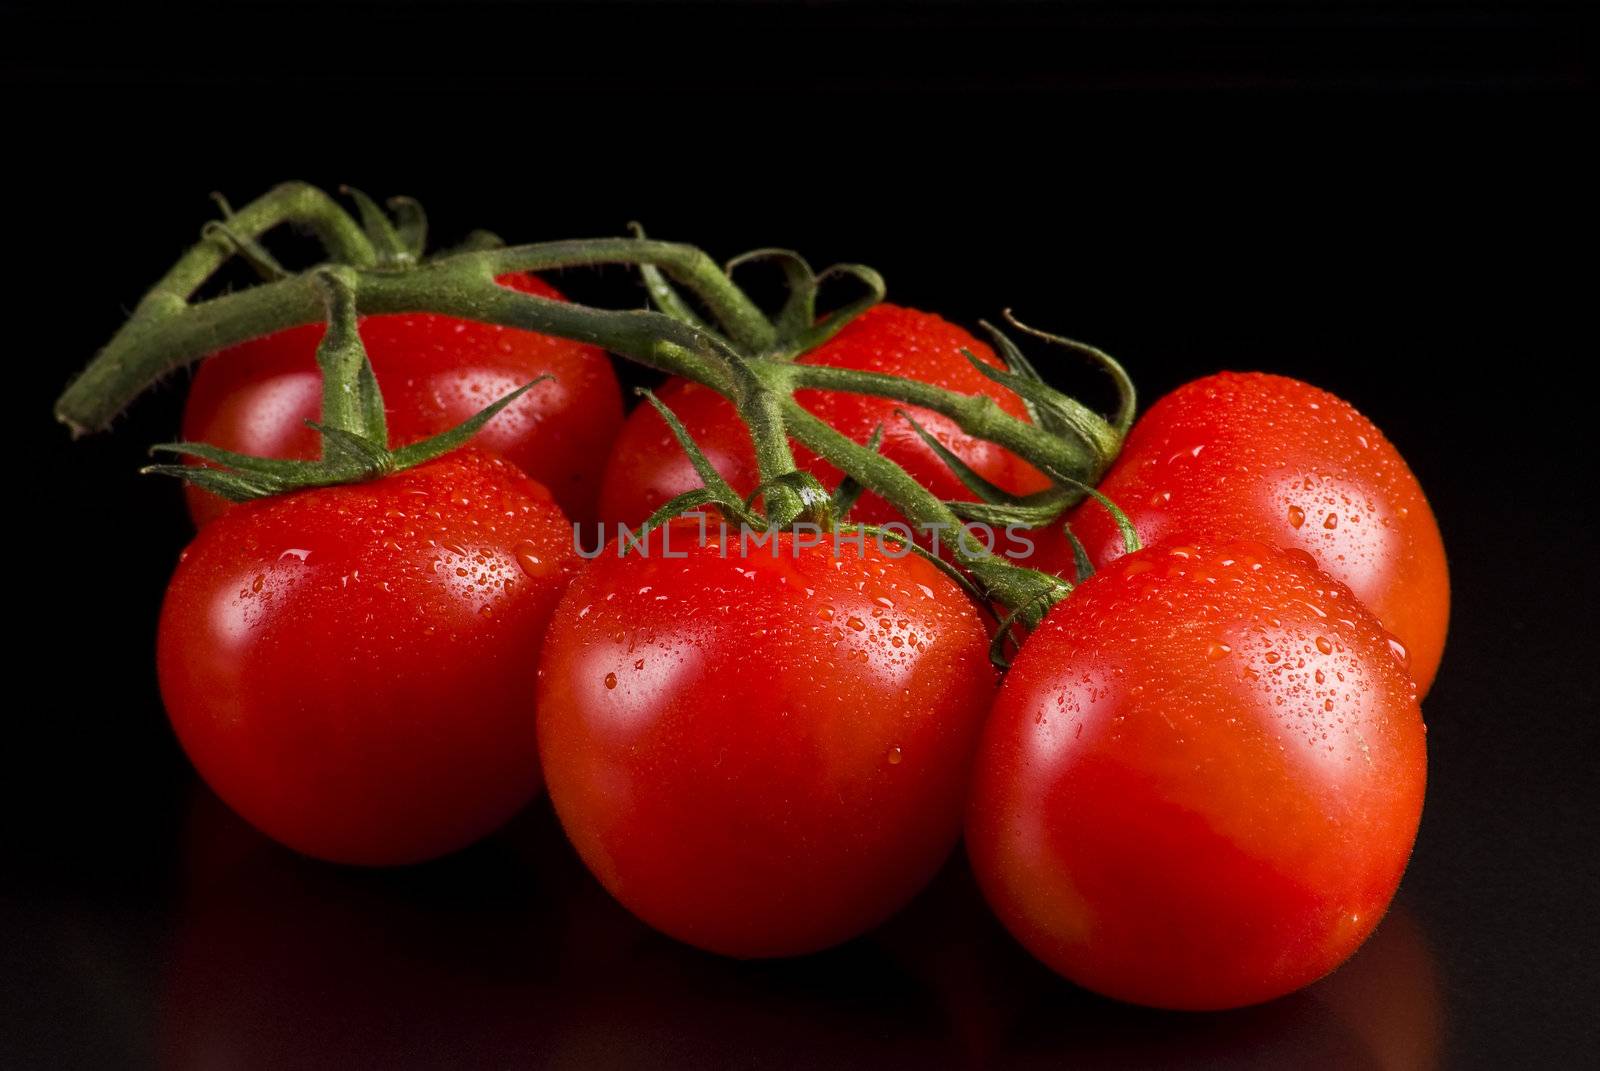 Tomatoes by caldix